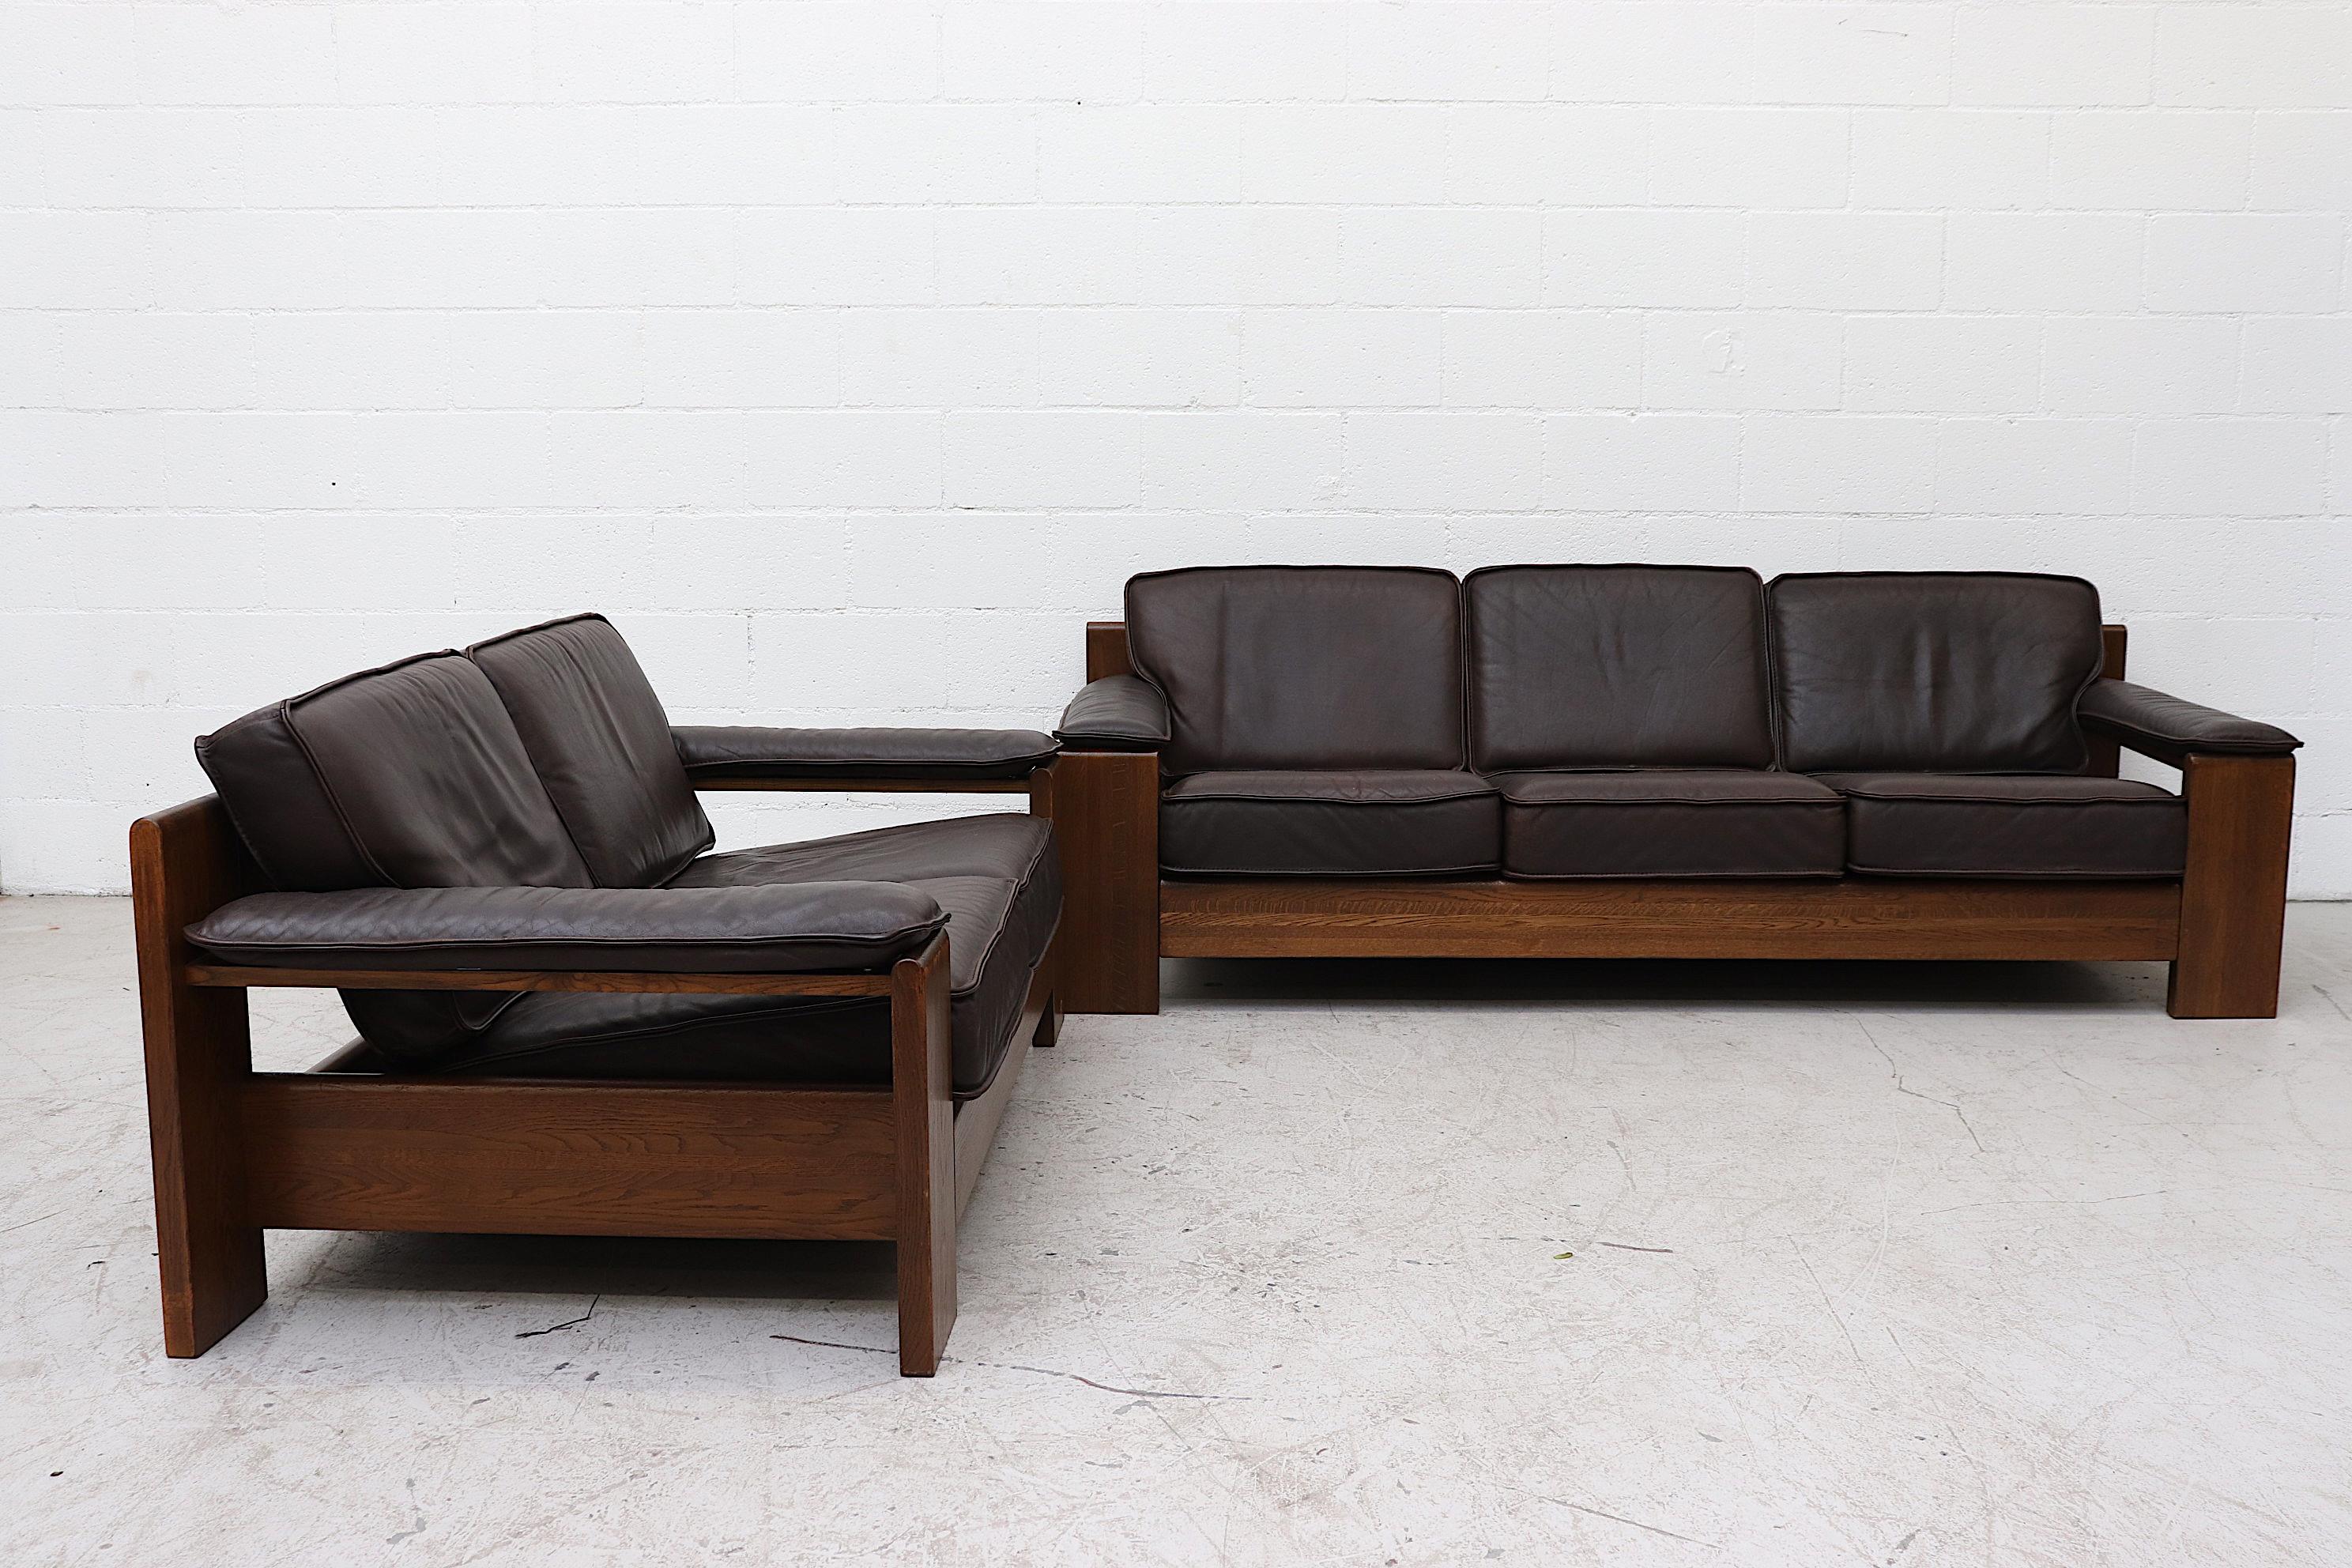 Amazing Dark Oak Framed Leolux 3 Seater Sofa with Beautifully Worn Espresso Leather Cushions. Armrests Snap On, a snap may be missing on one armrest. In Original Condition with Wear Consistent with its Age and Use. Shot with Matching Loveseat